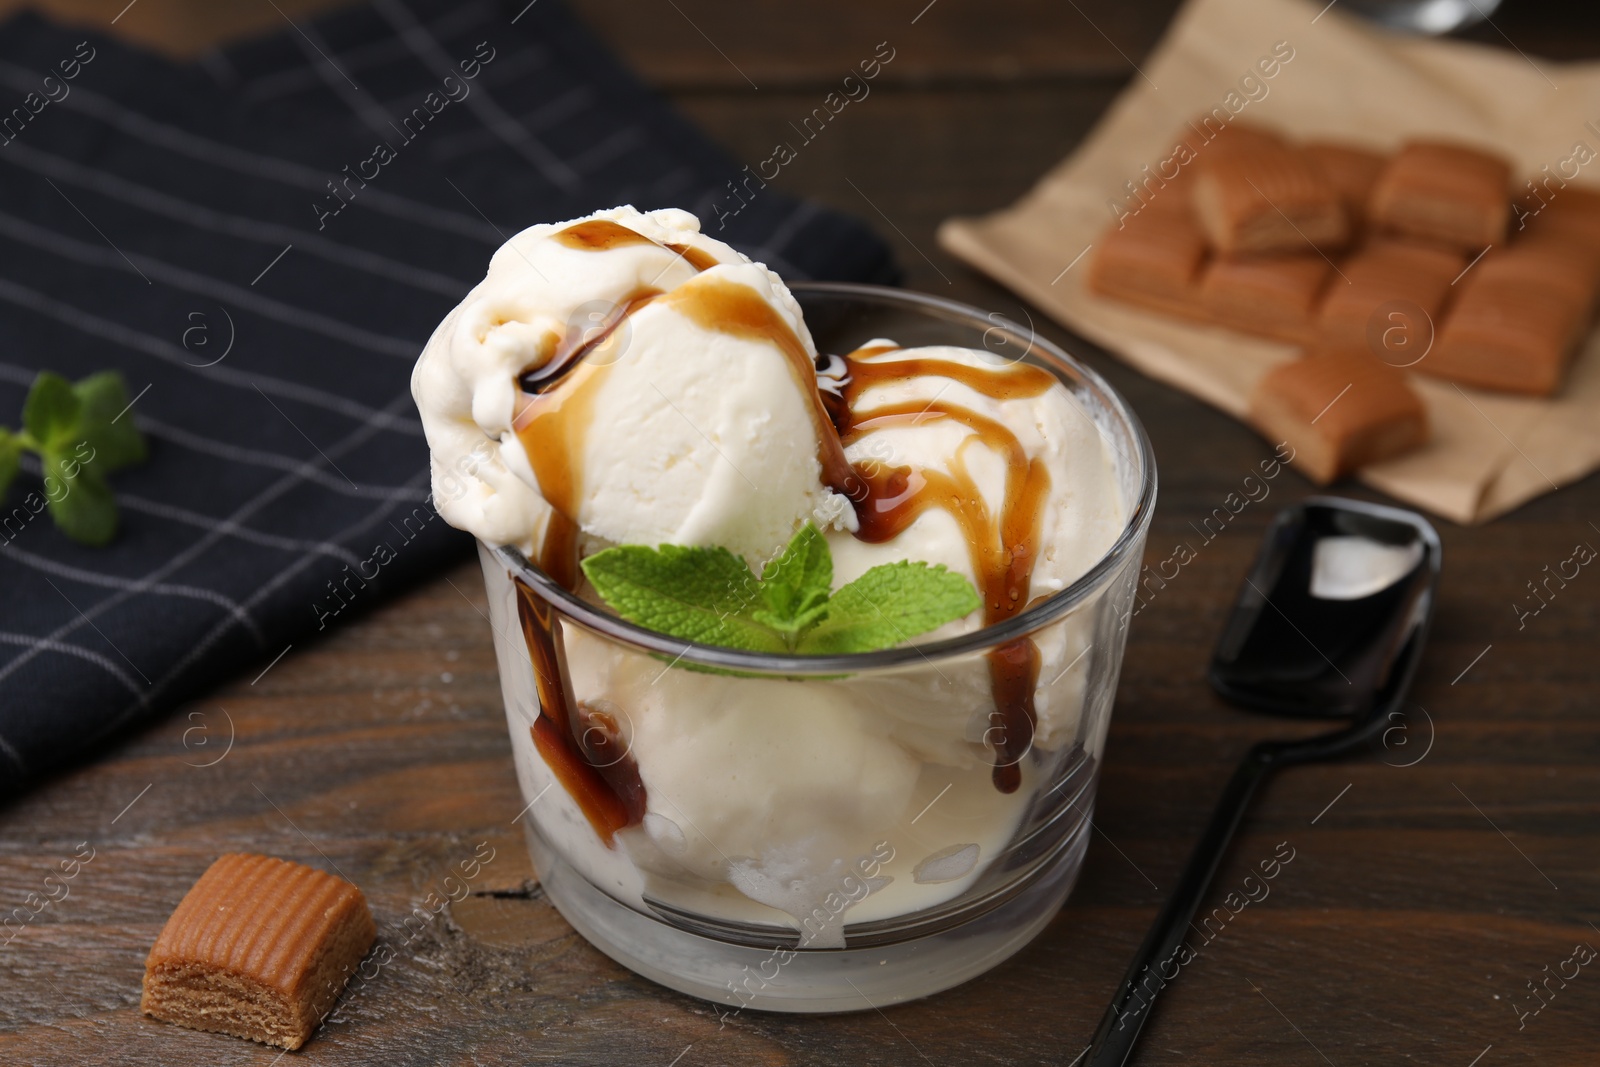 Photo of Scoops of ice cream with caramel sauce, mint leaves and candies on wooden table, closeup